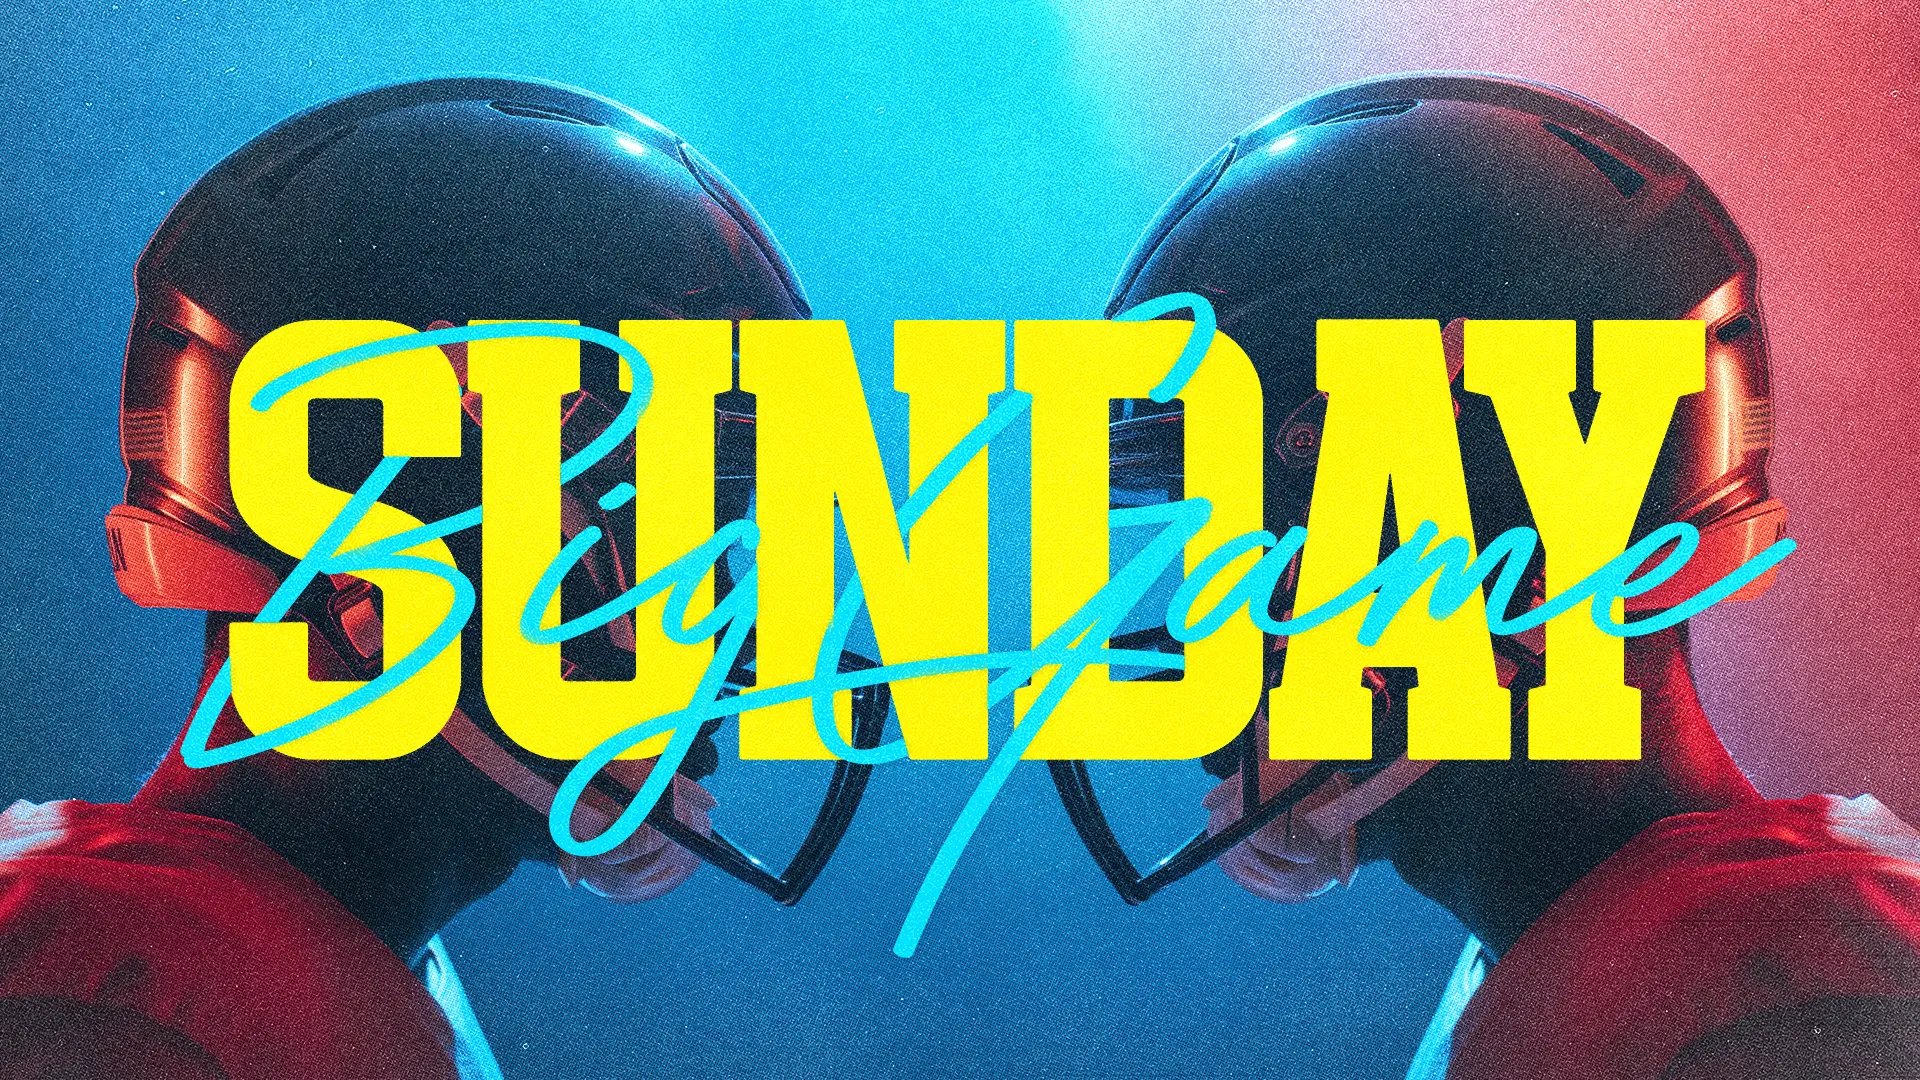 Invite Your Community To Experience The Thrill Of Fellowship With Our &Quot;Big Game Sunday&Quot; Church Media Template, Featuring Vibrant, Contrasting Colors And Dynamic Imagery Of Football Helmets That Symbolize Teamwork And Unity.